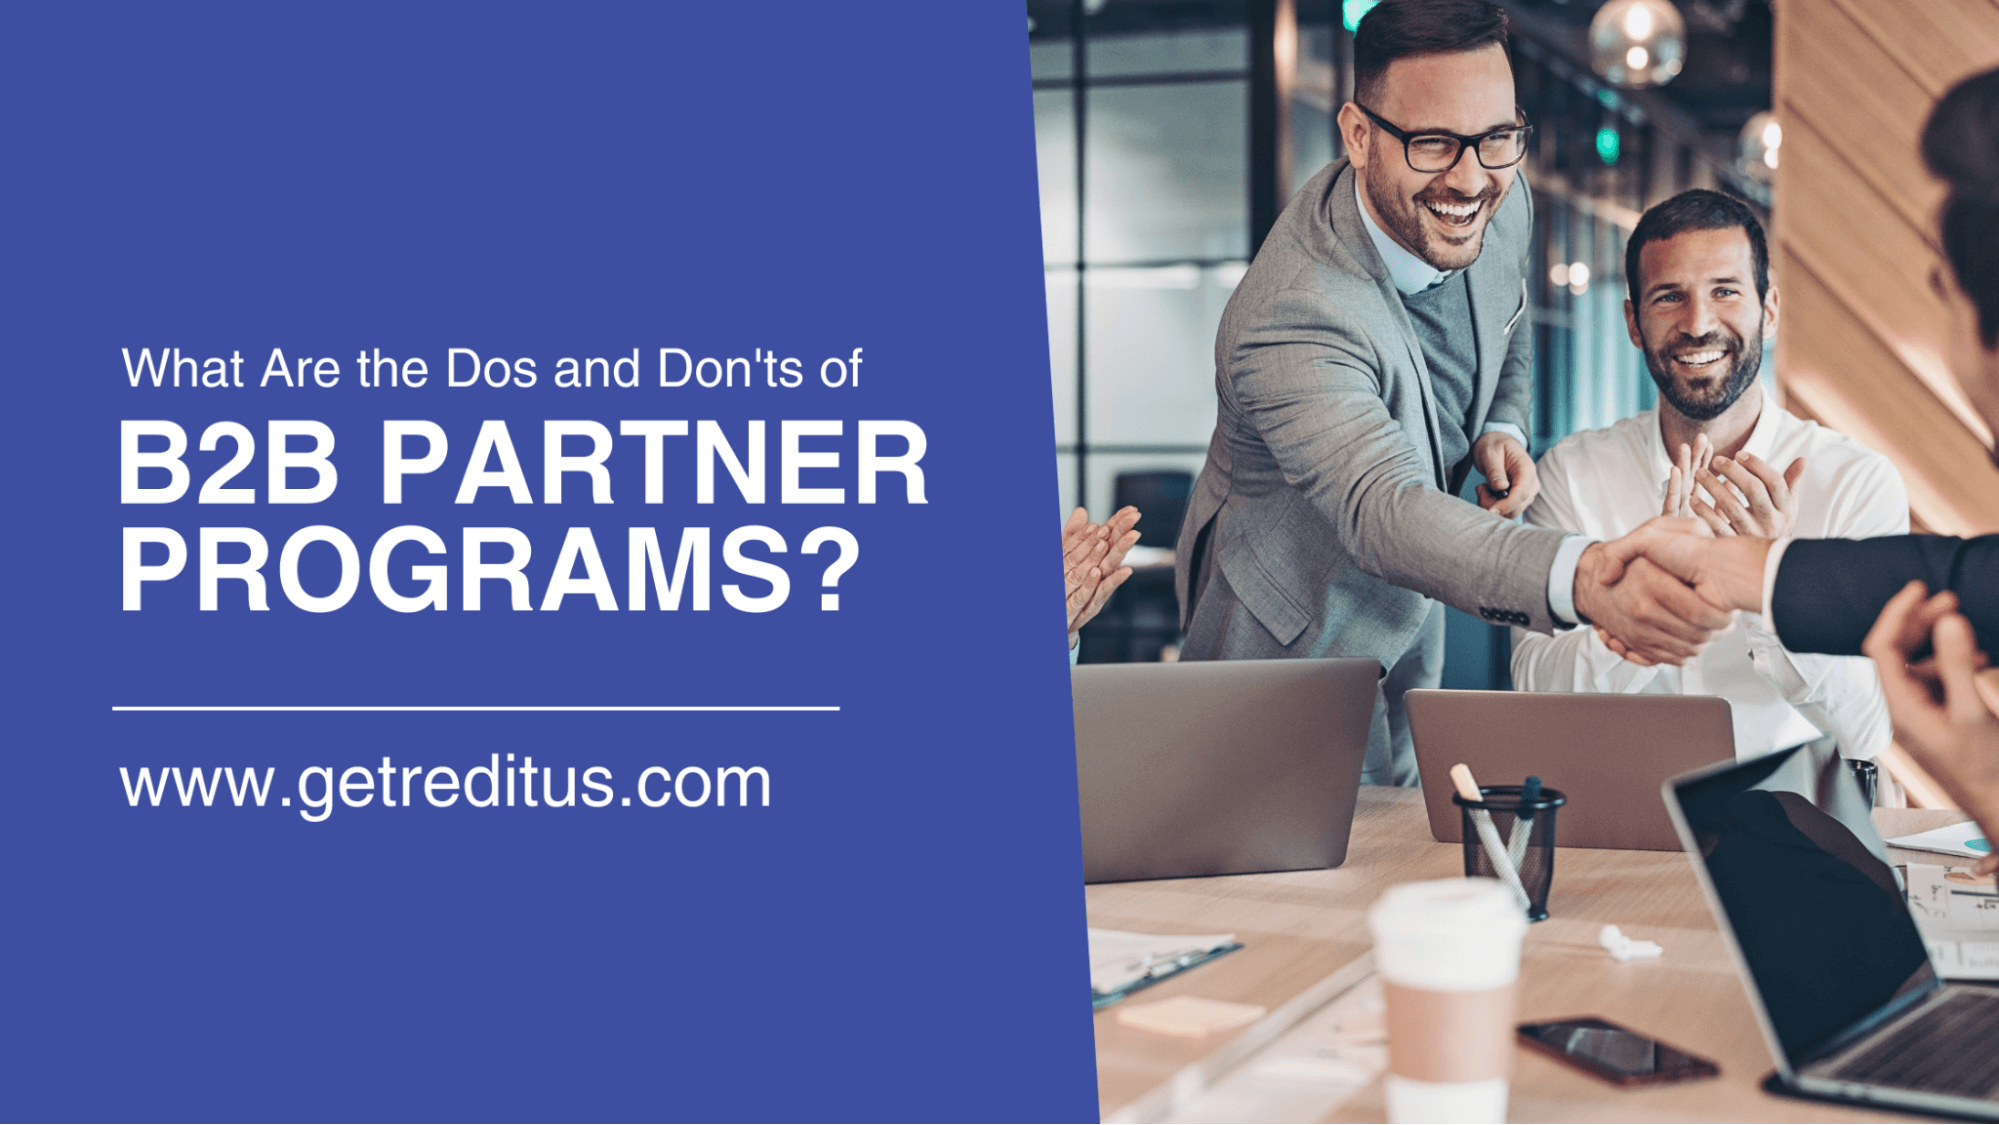 https://www.getreditus.com/blog/b2b-partner-programs-the-dos-and-donts/